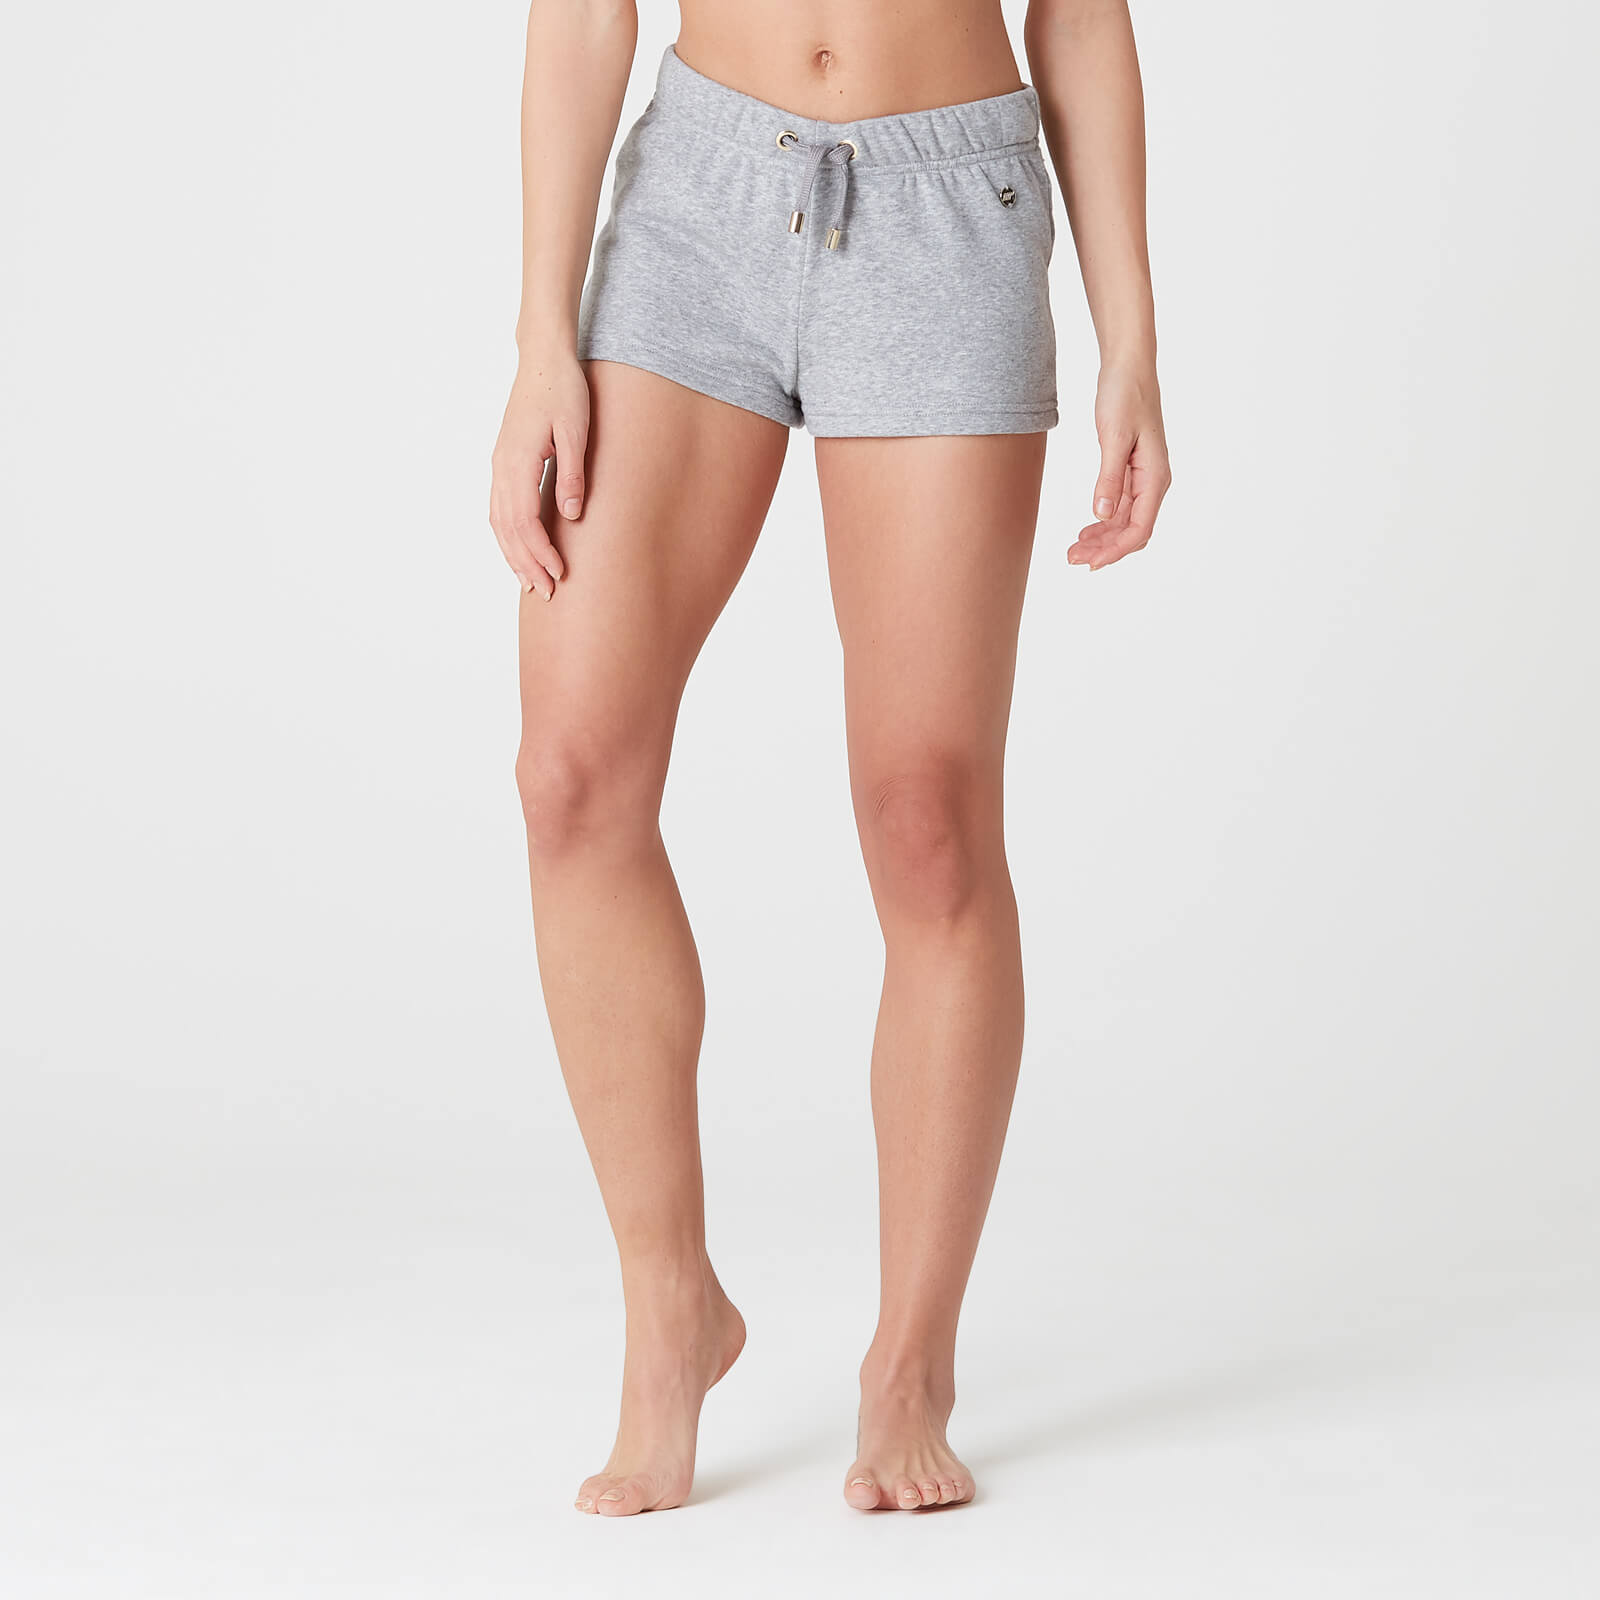 Myprotein Luxe Lounge Shorts - Grey Marl - S